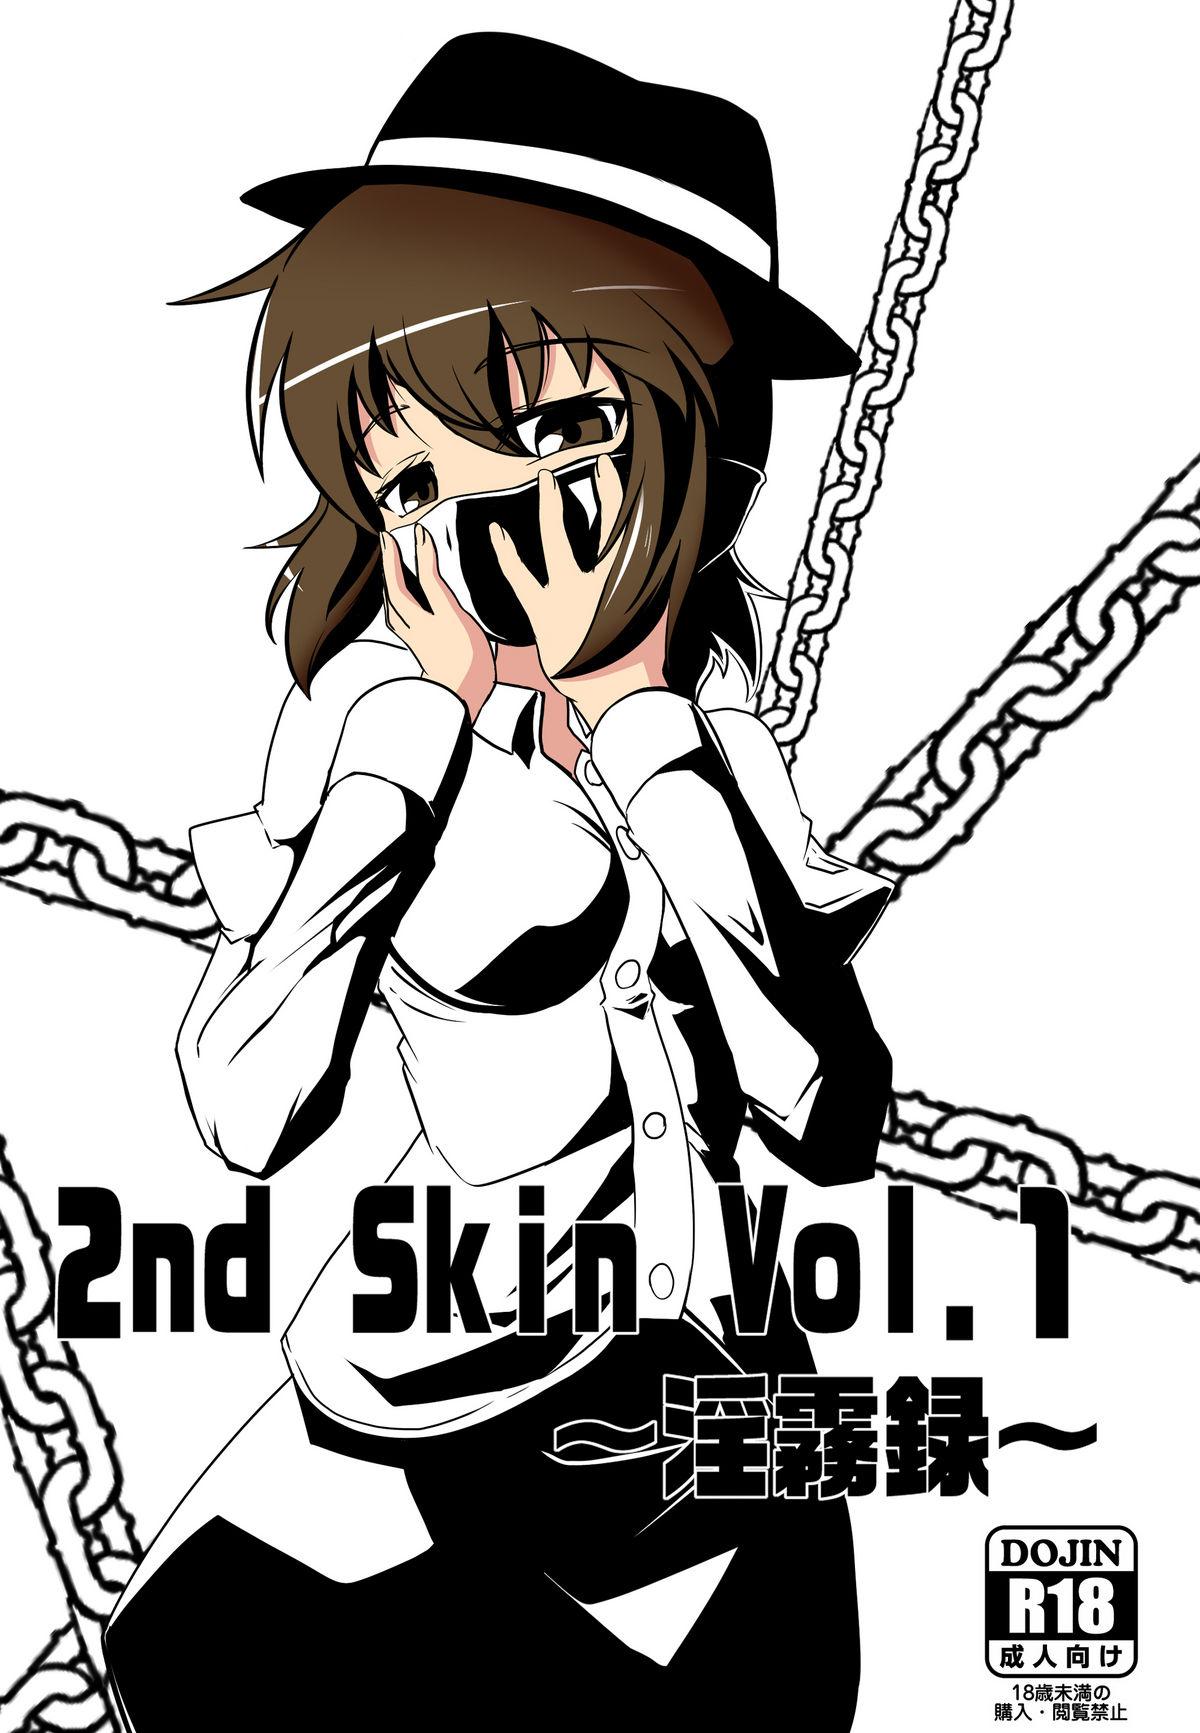 2nd Skin Vol.1 ～淫霧録～ [にゃんこの目 (たまっこ)] (東方Project) [DL版] 0